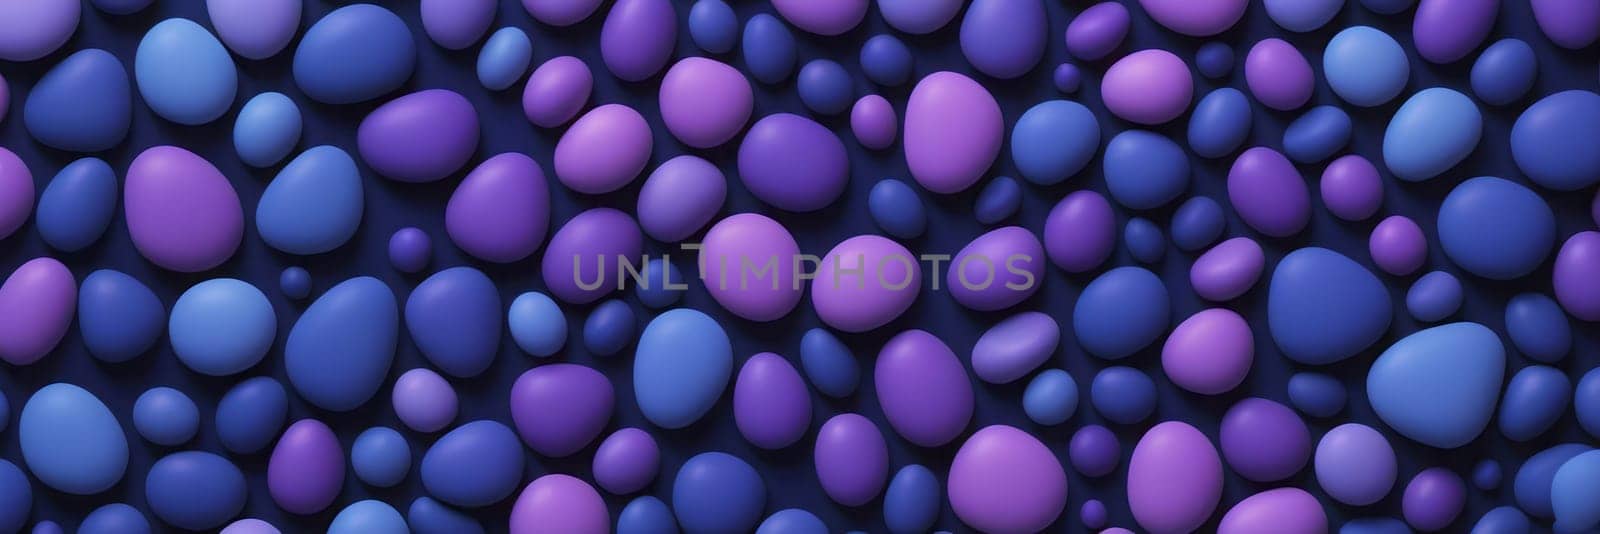 Pebbled Shapes in Navy and Medium purple by nkotlyar